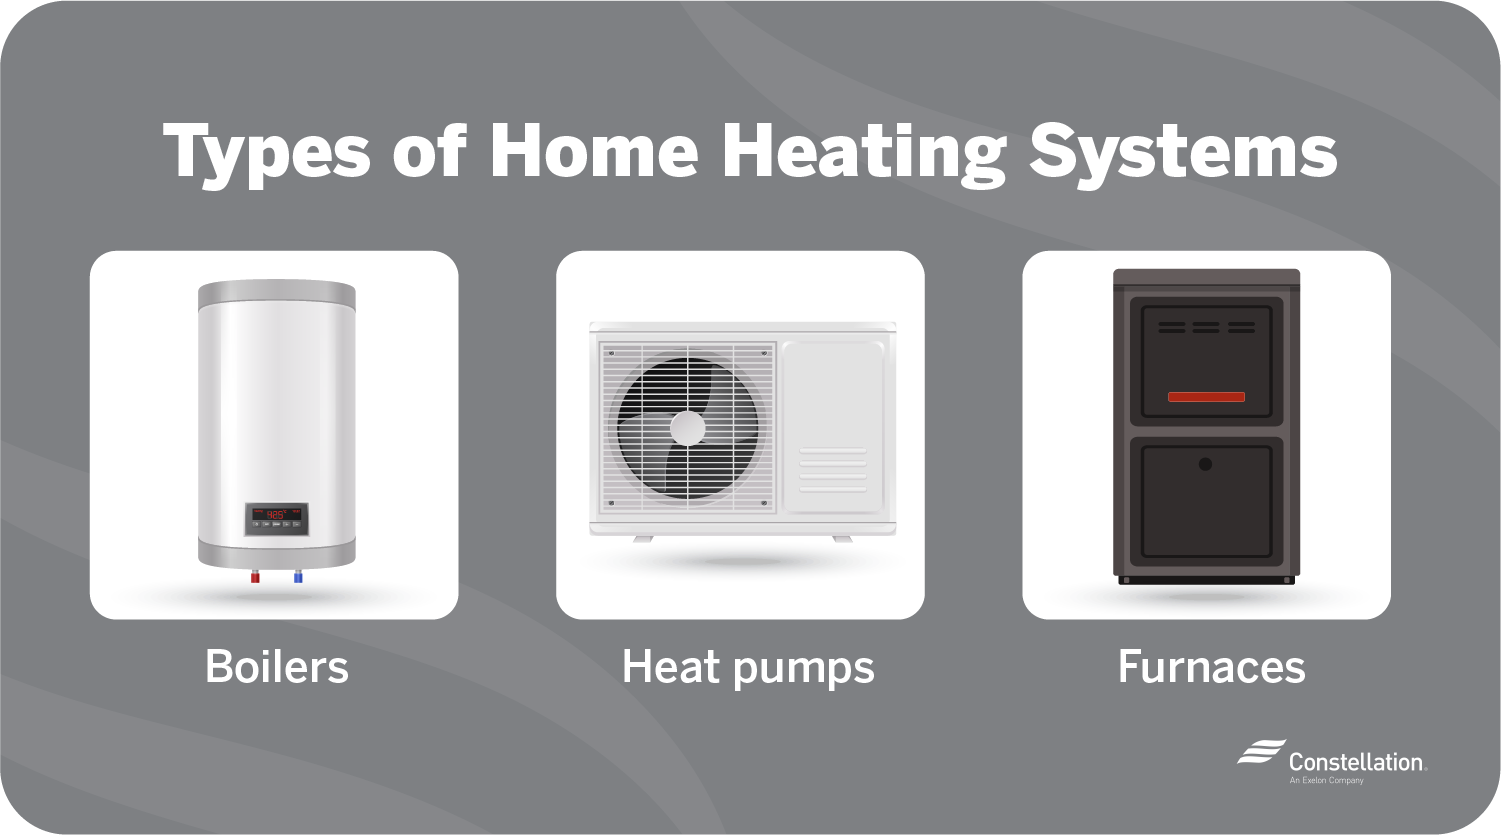 Types of home heating systems